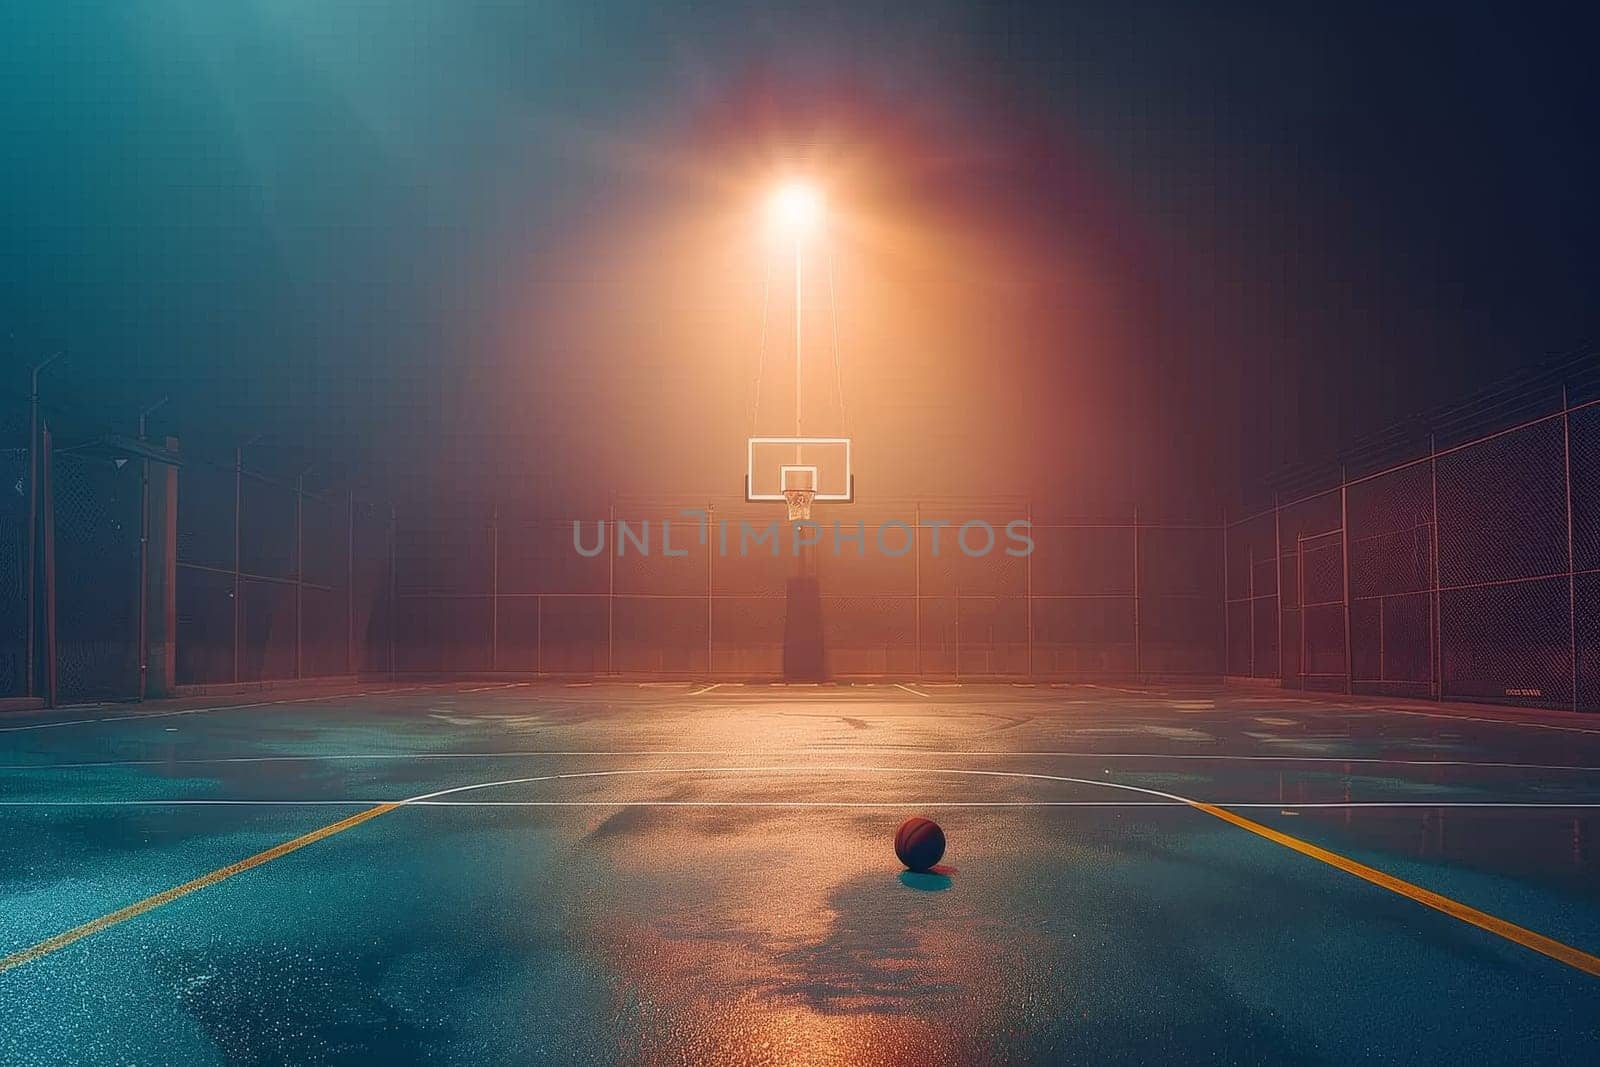 A basketball is sitting on the court in a dimly lit gym. The ball is the only object in the scene, and the atmosphere is quiet and still